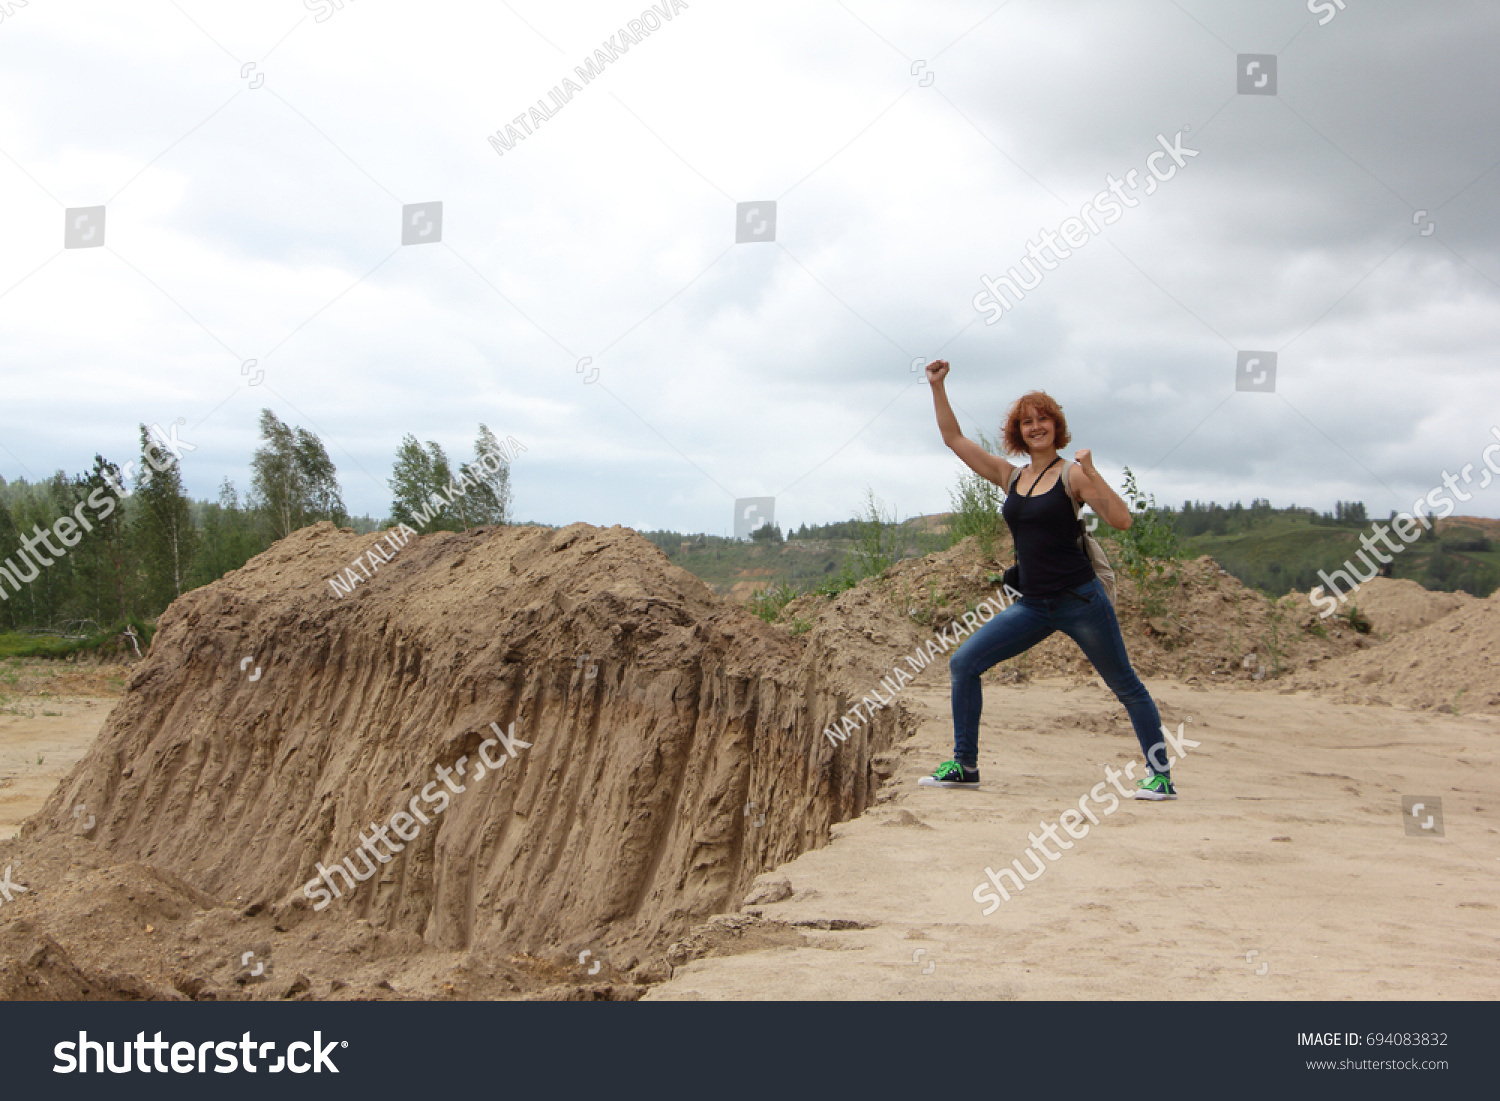 standing sand pit